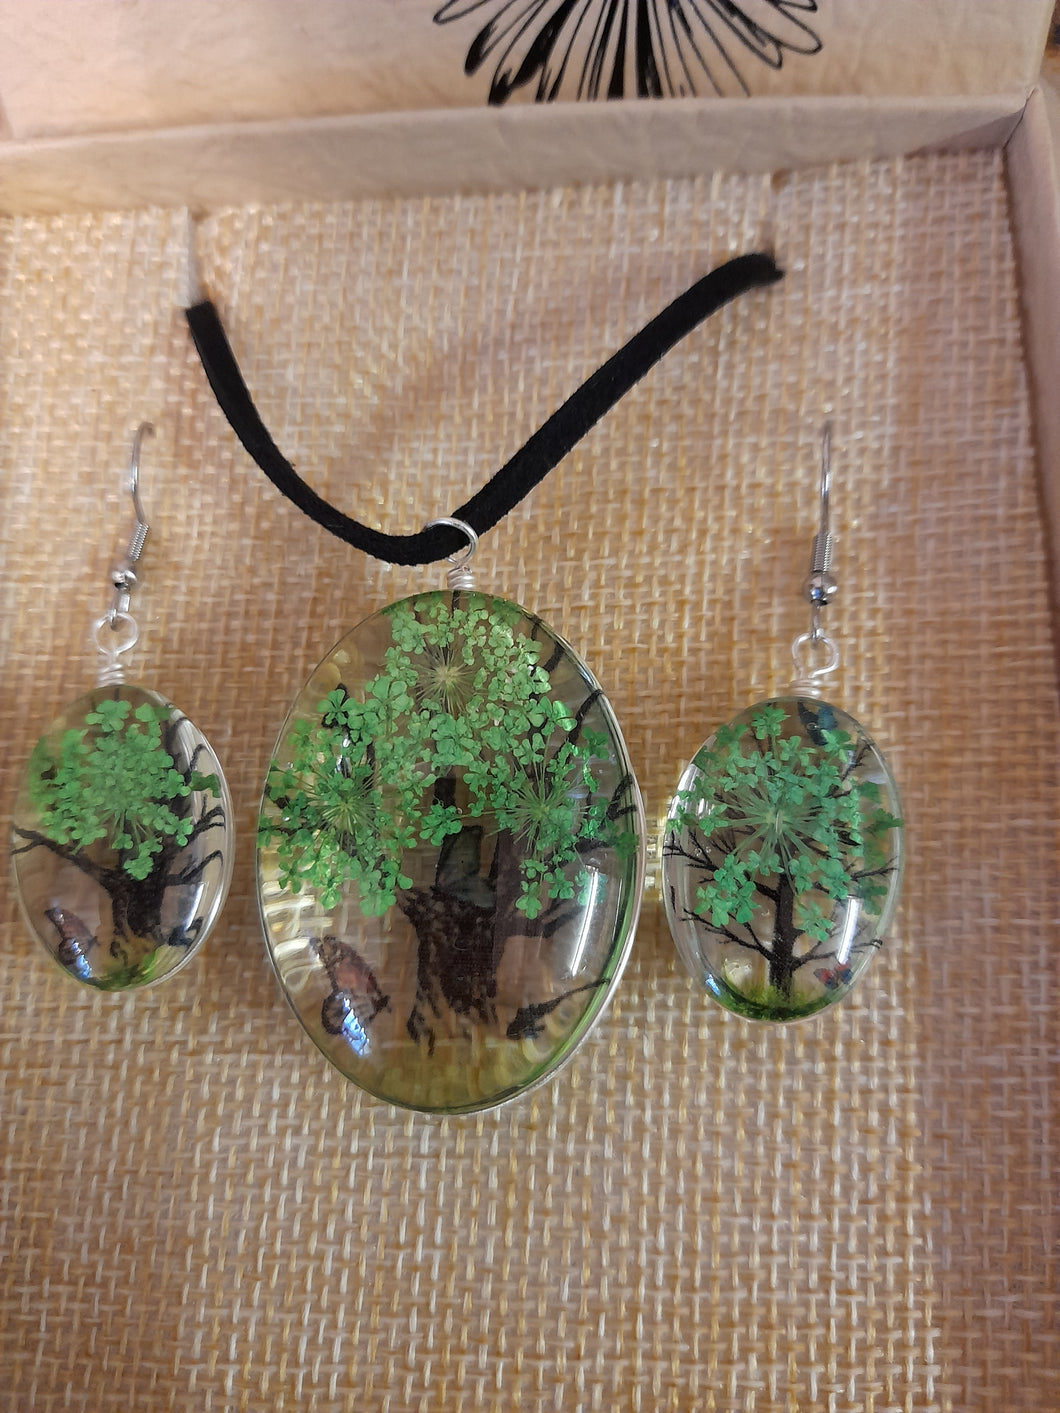 Tree of life glass pendant and earrings set with real pressed flowers